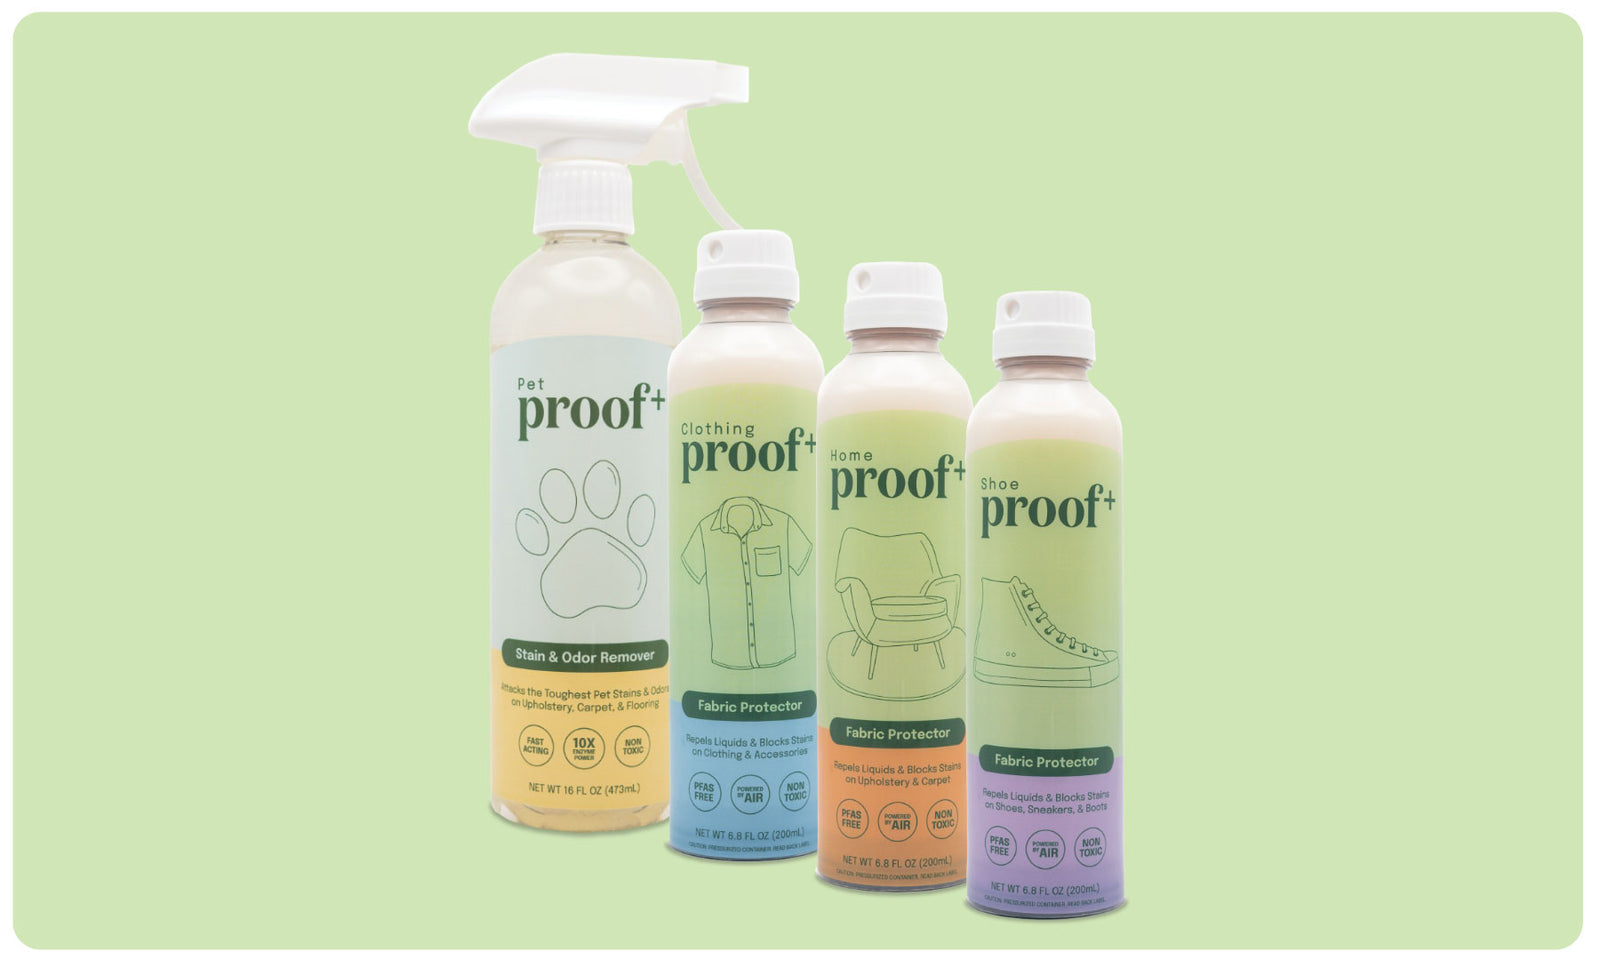 ProofPlus bottles lined up: pet stain & odor remover, clothing fabric protector, home fabric protector, and shoe fabric protector